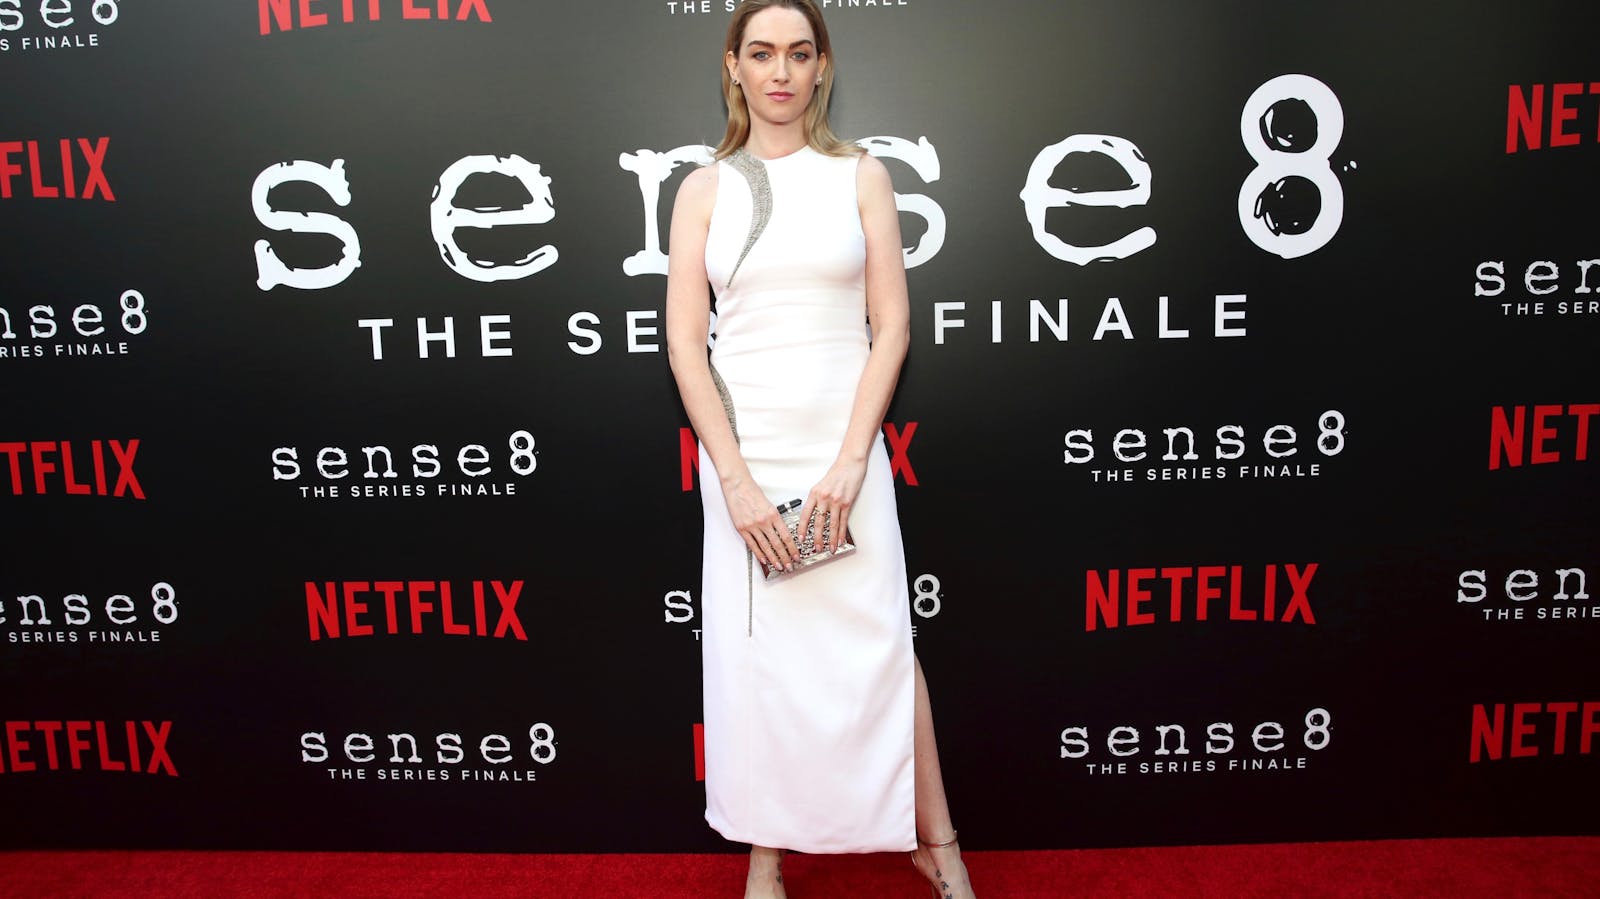 Actress Jamie Clayton from "Sense8" at a screening for the show in Los Angeles last June. Photo by AP